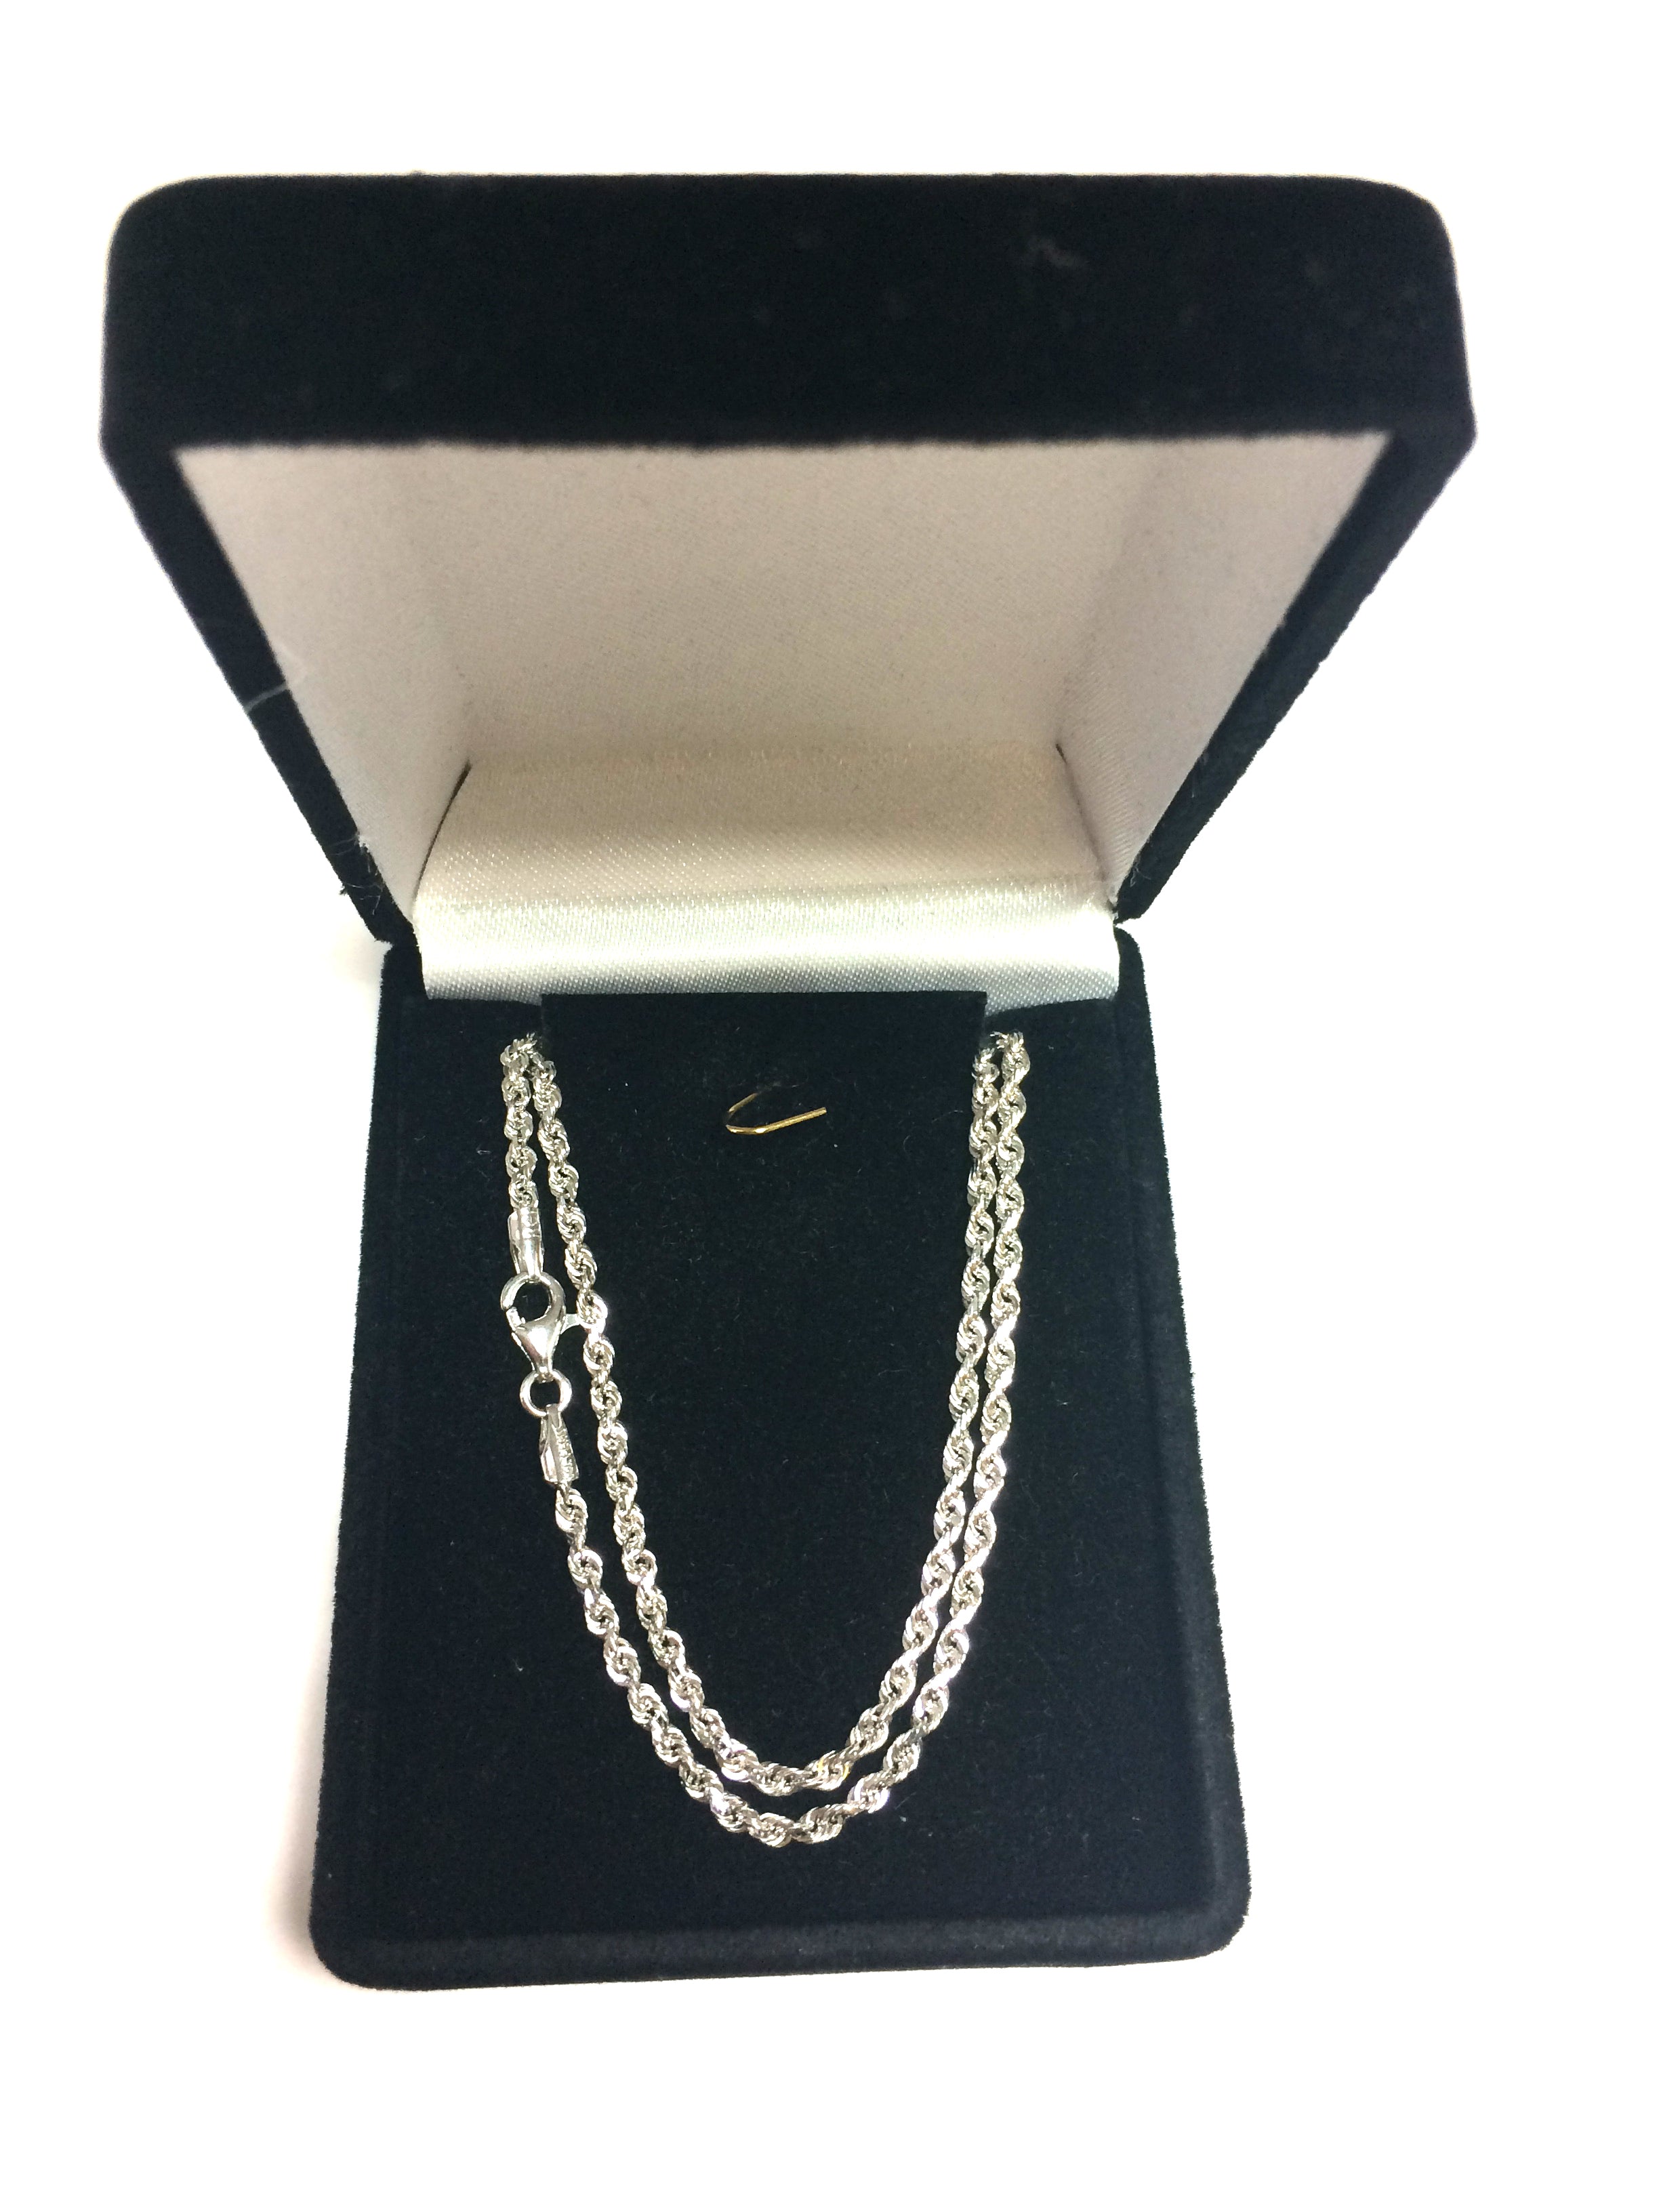 14k White Solid Gold Diamond Cut Rope Chain Necklace, 2.5mm fine designer jewelry for men and women